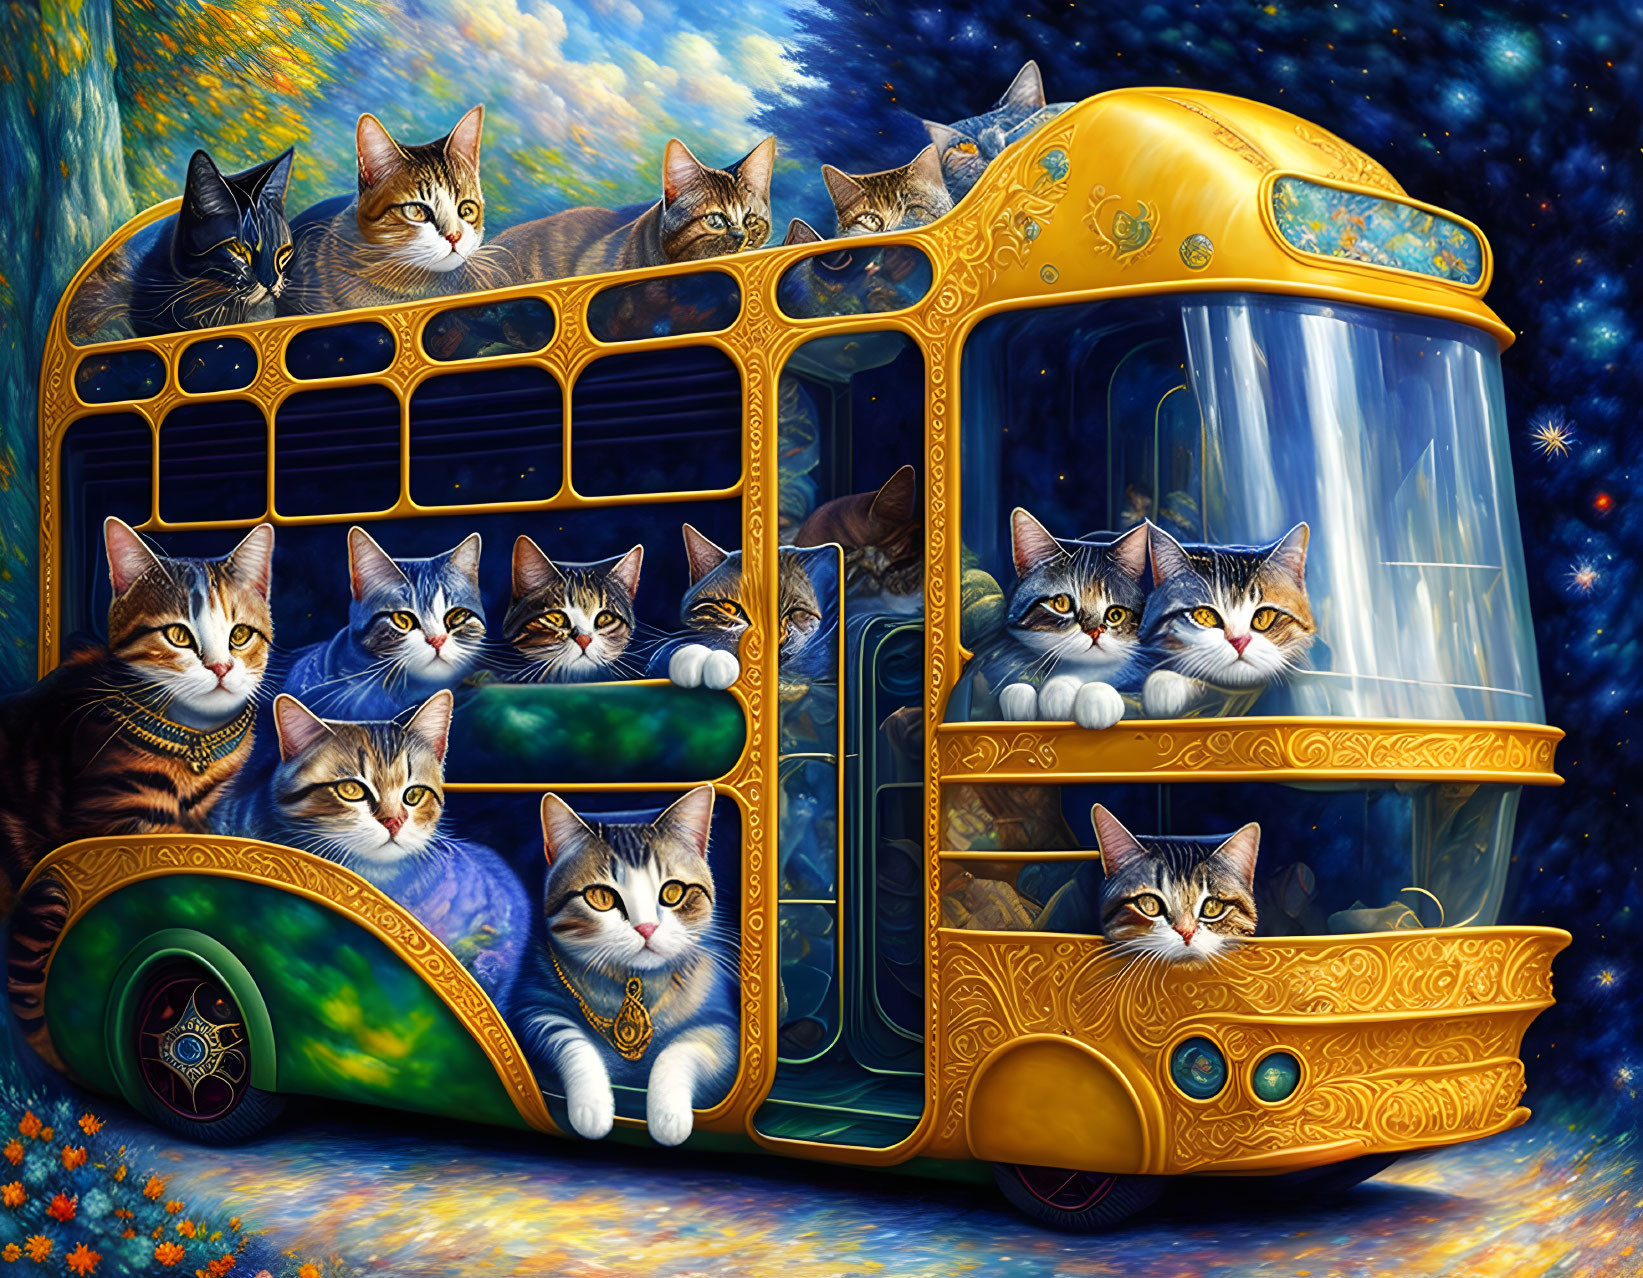 shuttle bus with boy cats inside. Patchwork by Ren